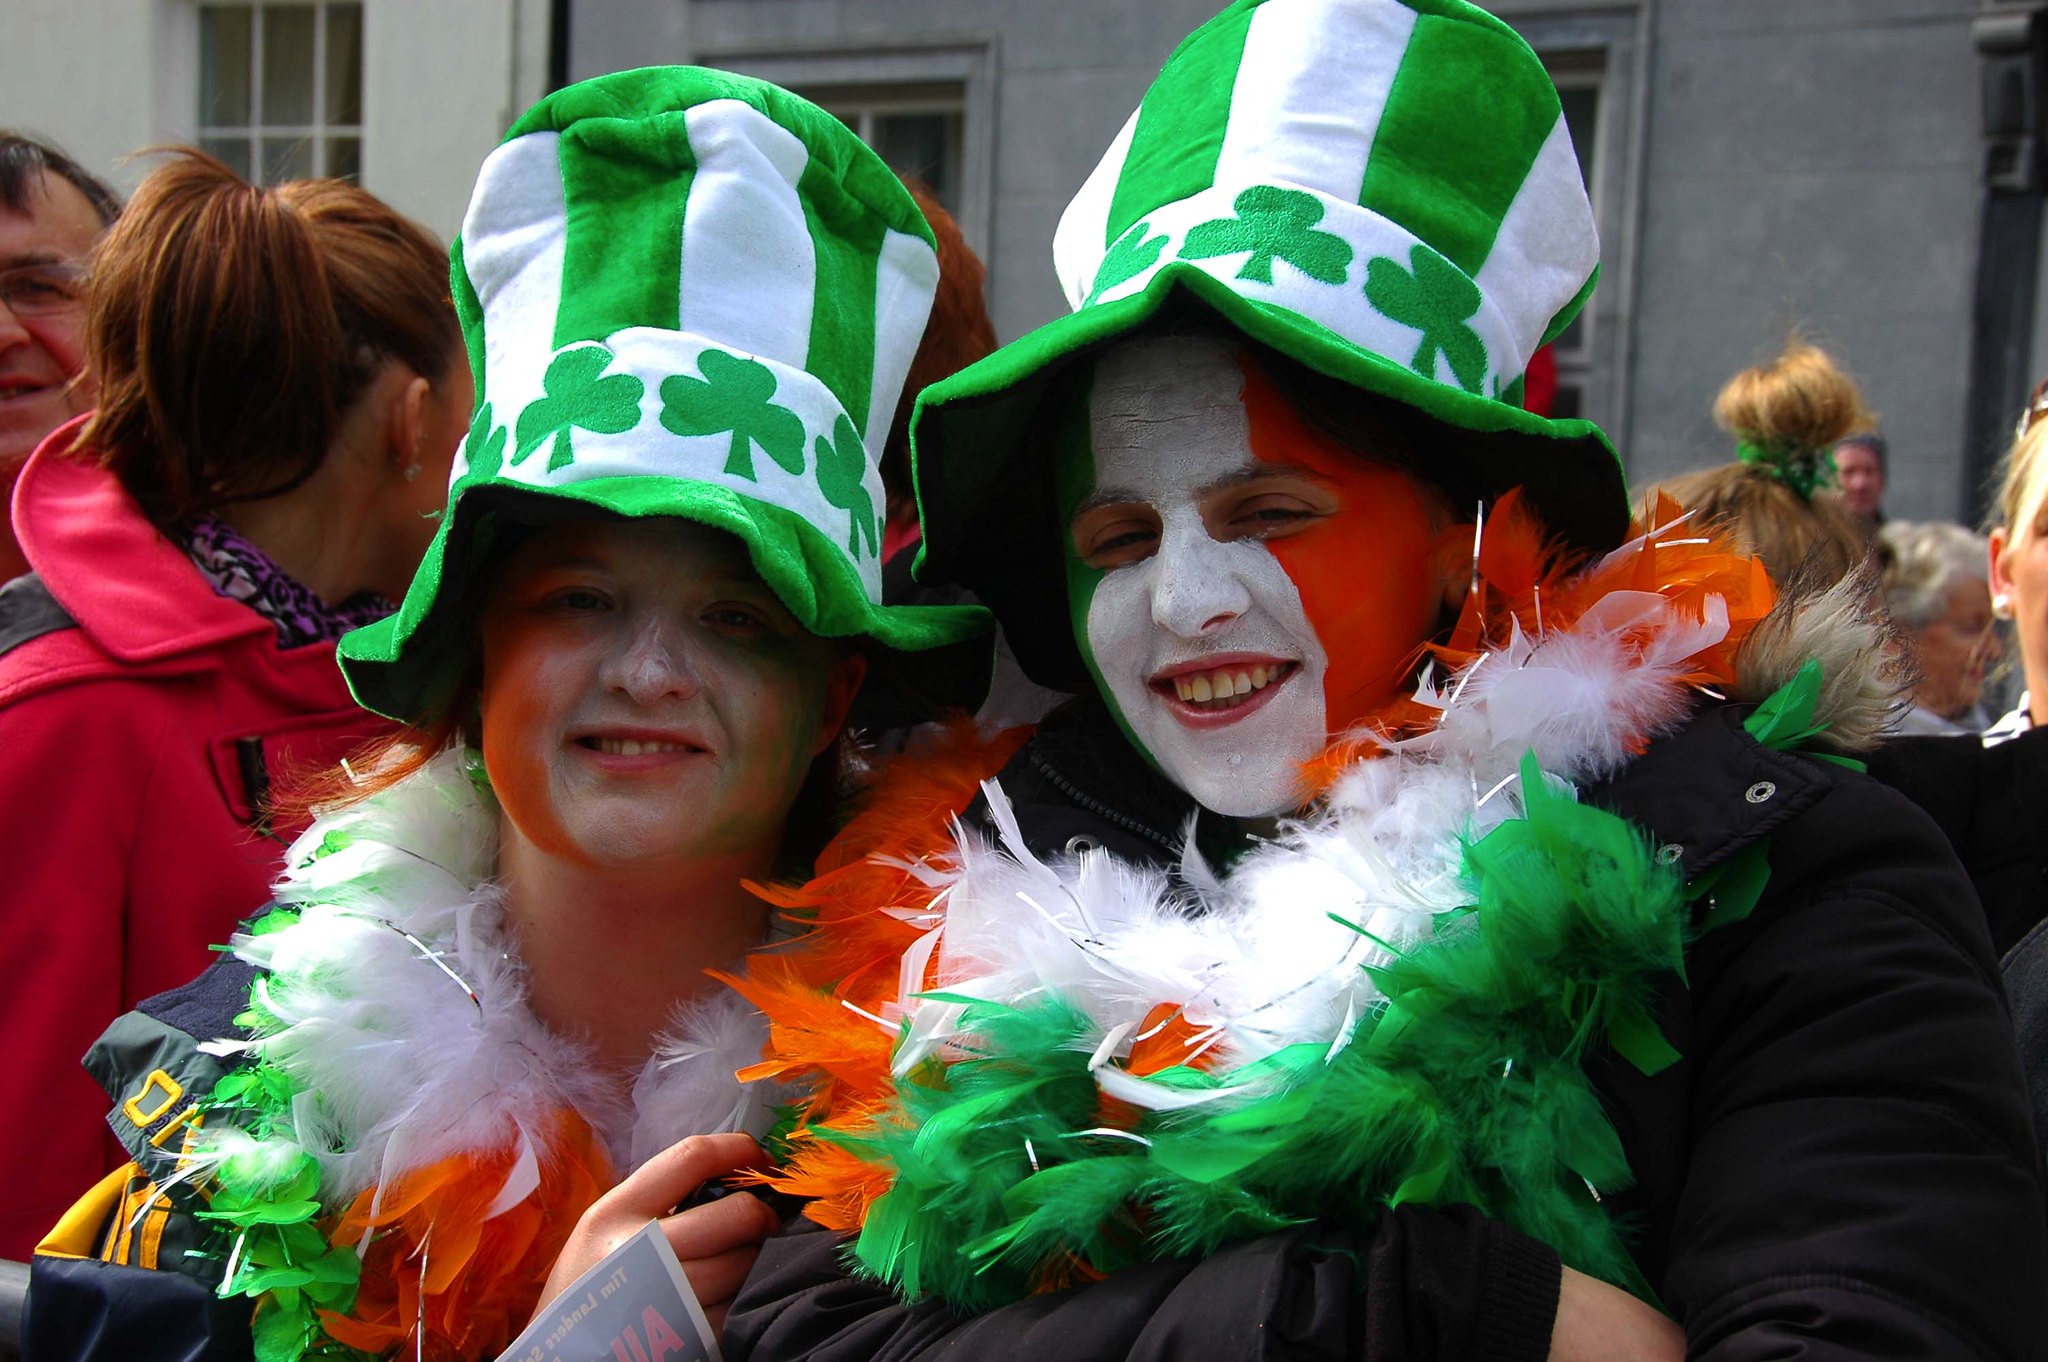 The Real Reason To Celebrate St. Patrick Has Nothing To Do With Beer Or Parades